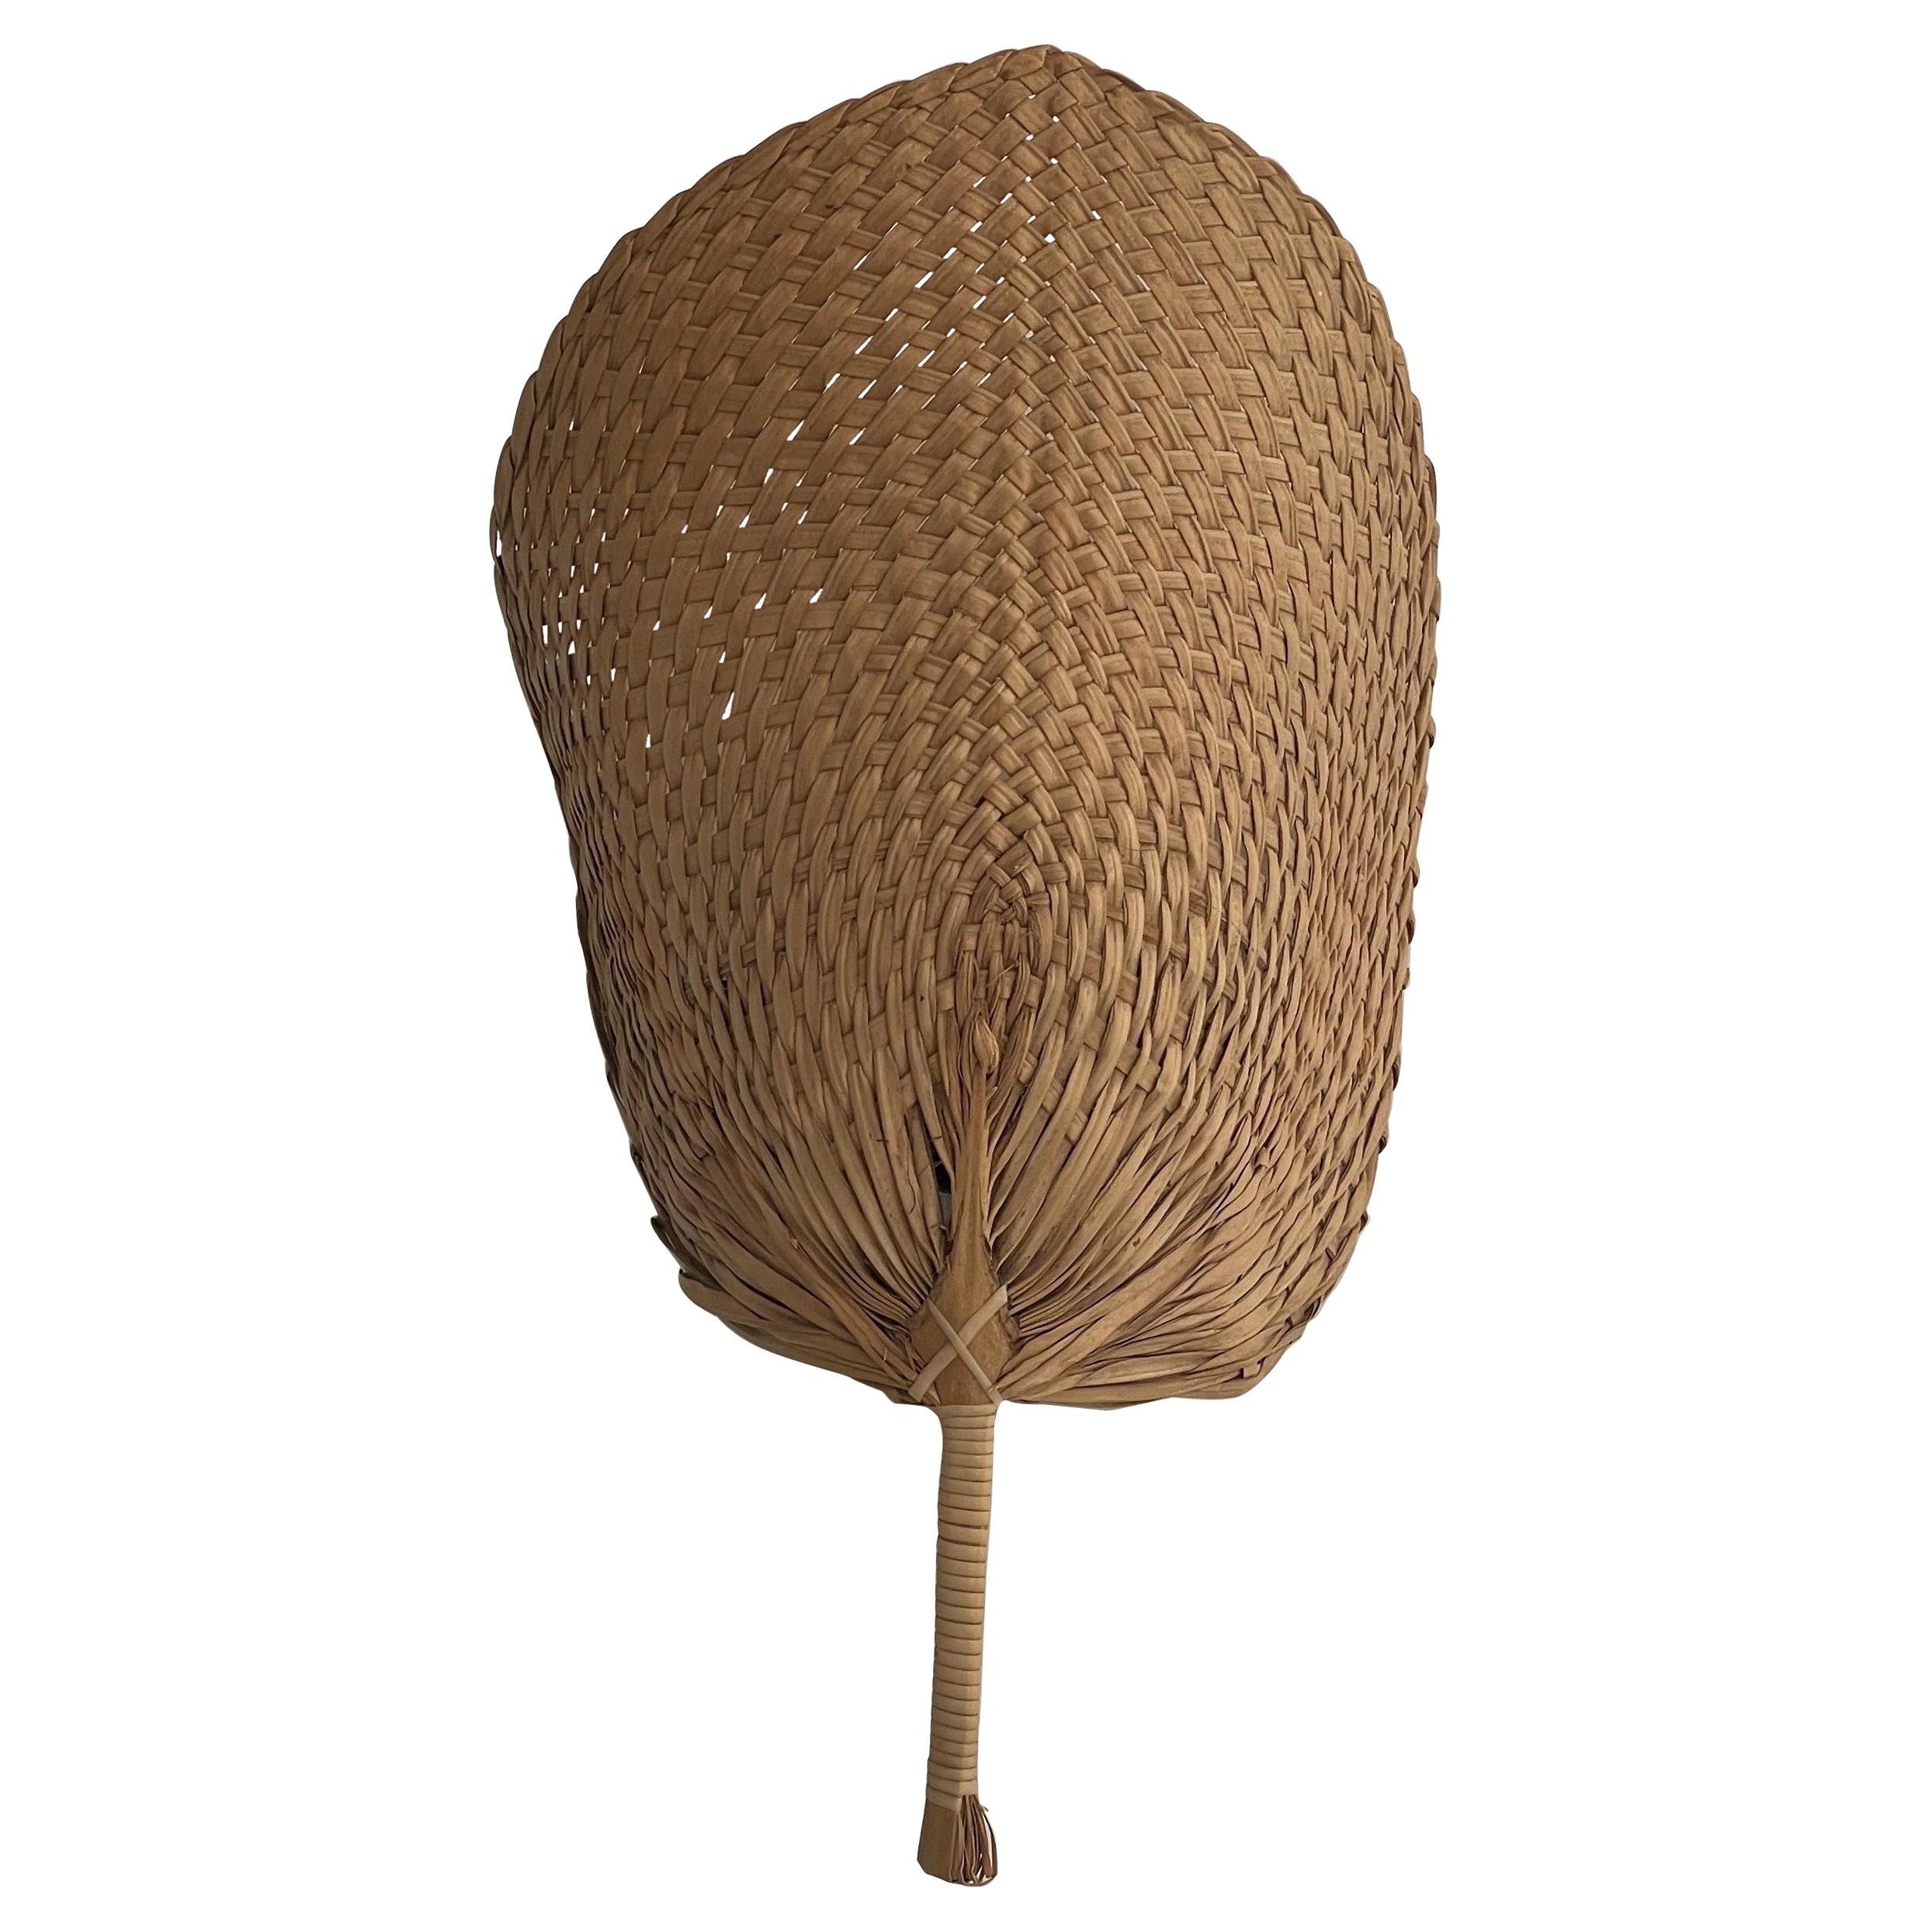 Hand-woven Wicker Palmate Leaf Design Single Sconce, 1960s, Germany For Sale